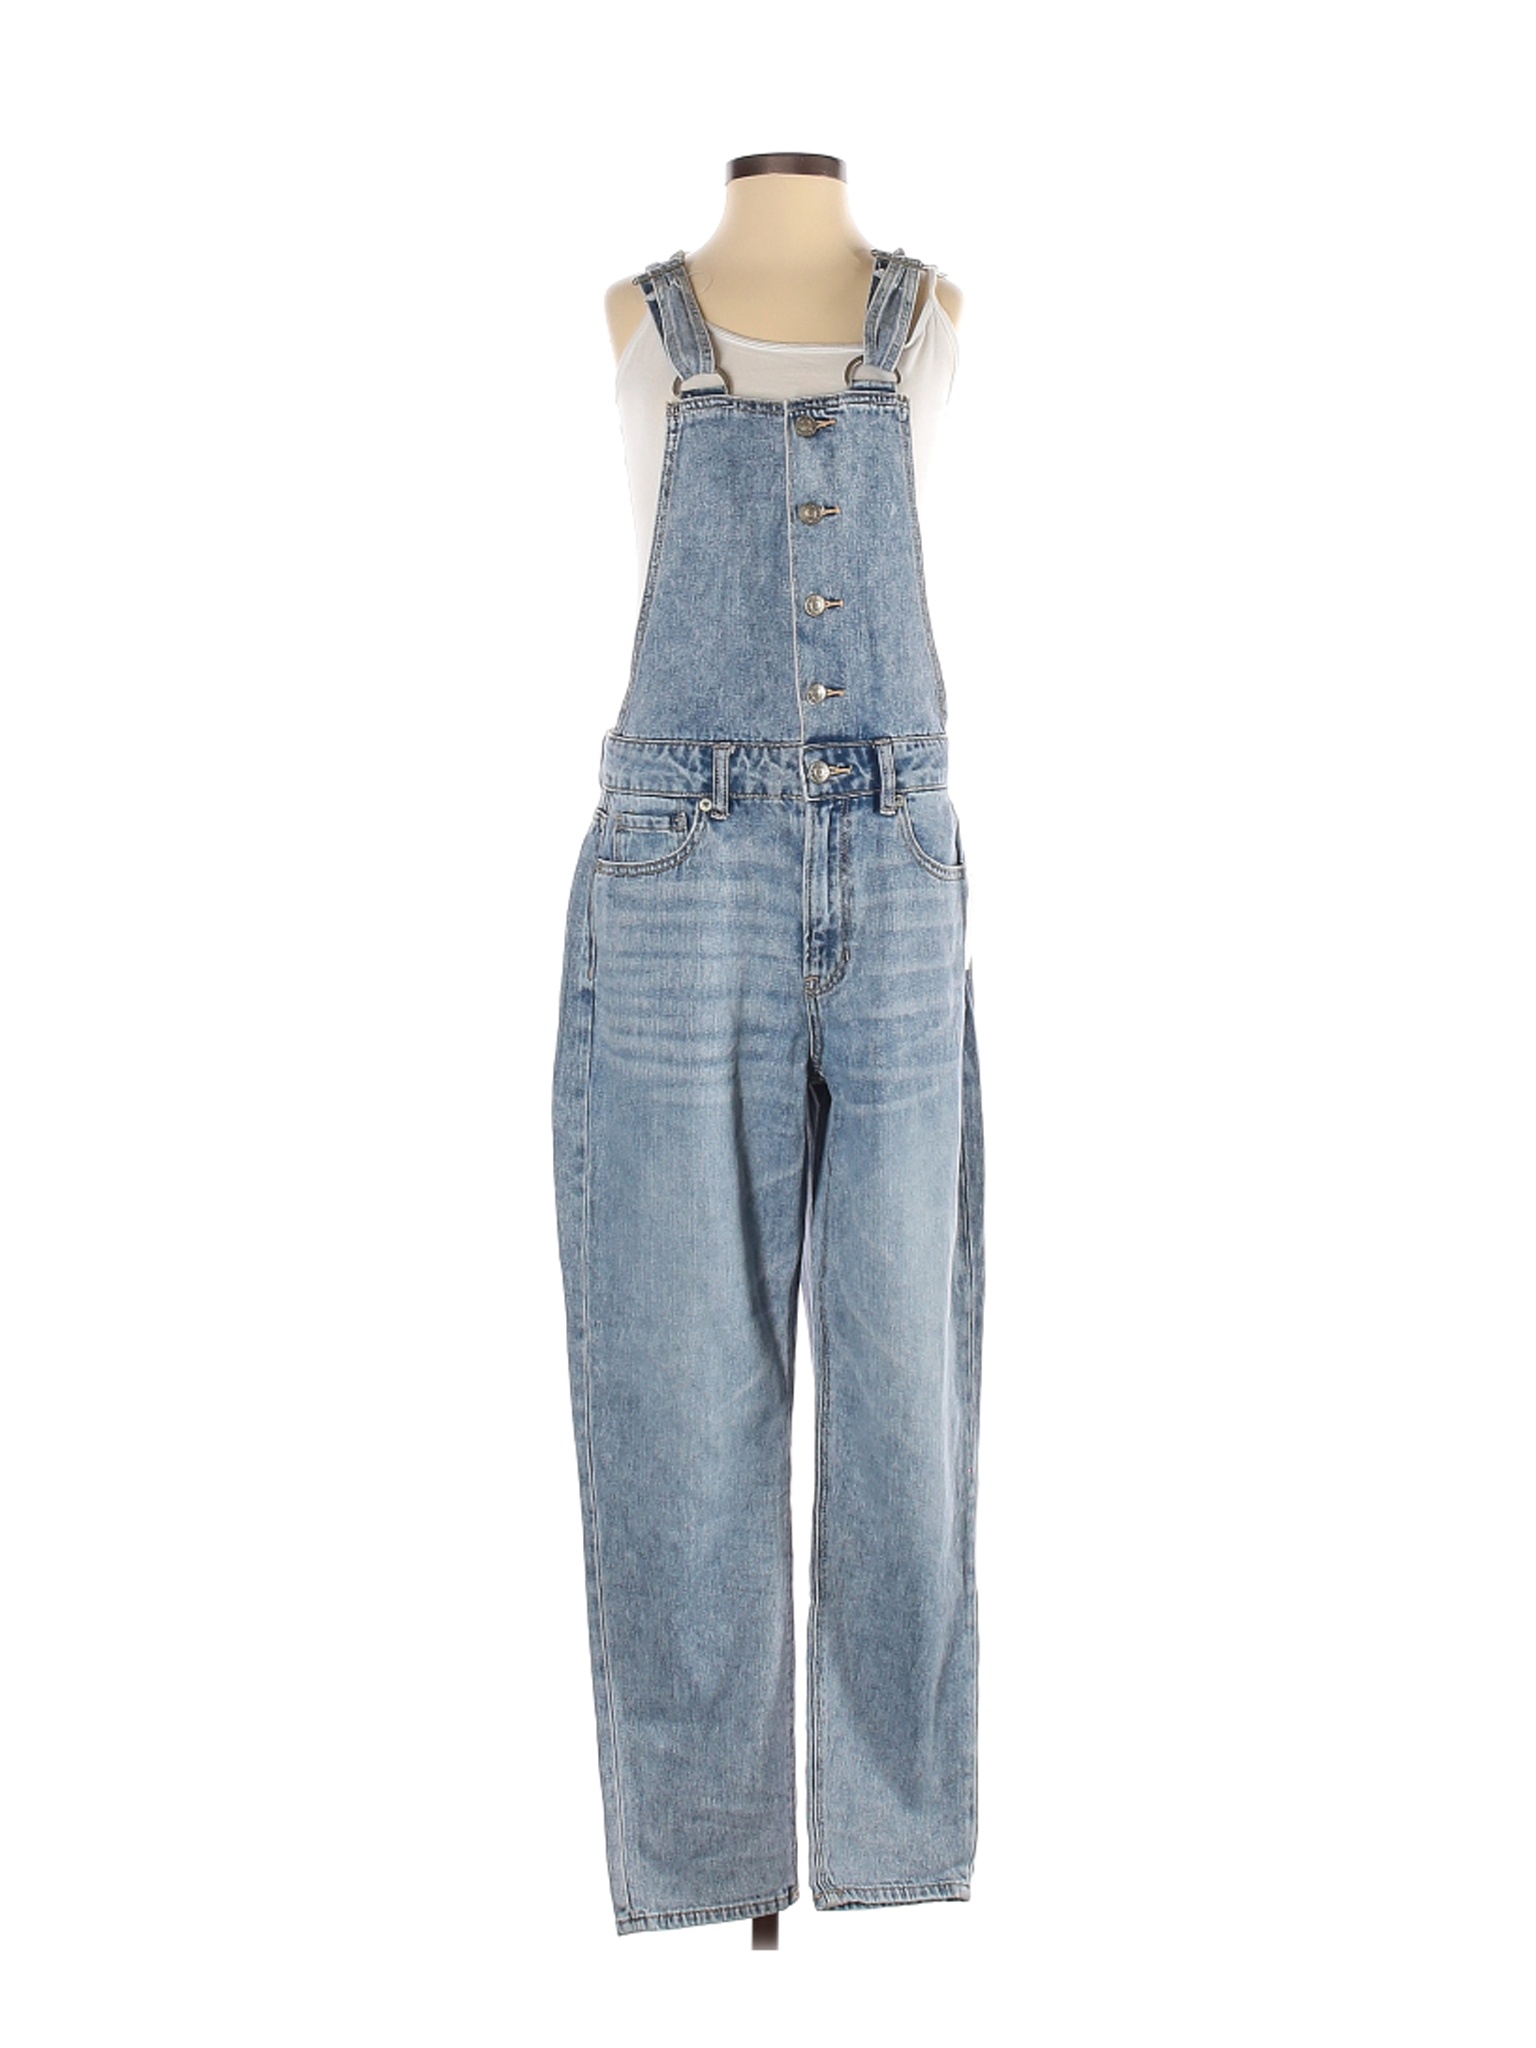 NWT American Eagle Outfitters Women Blue Overalls 2 | eBay